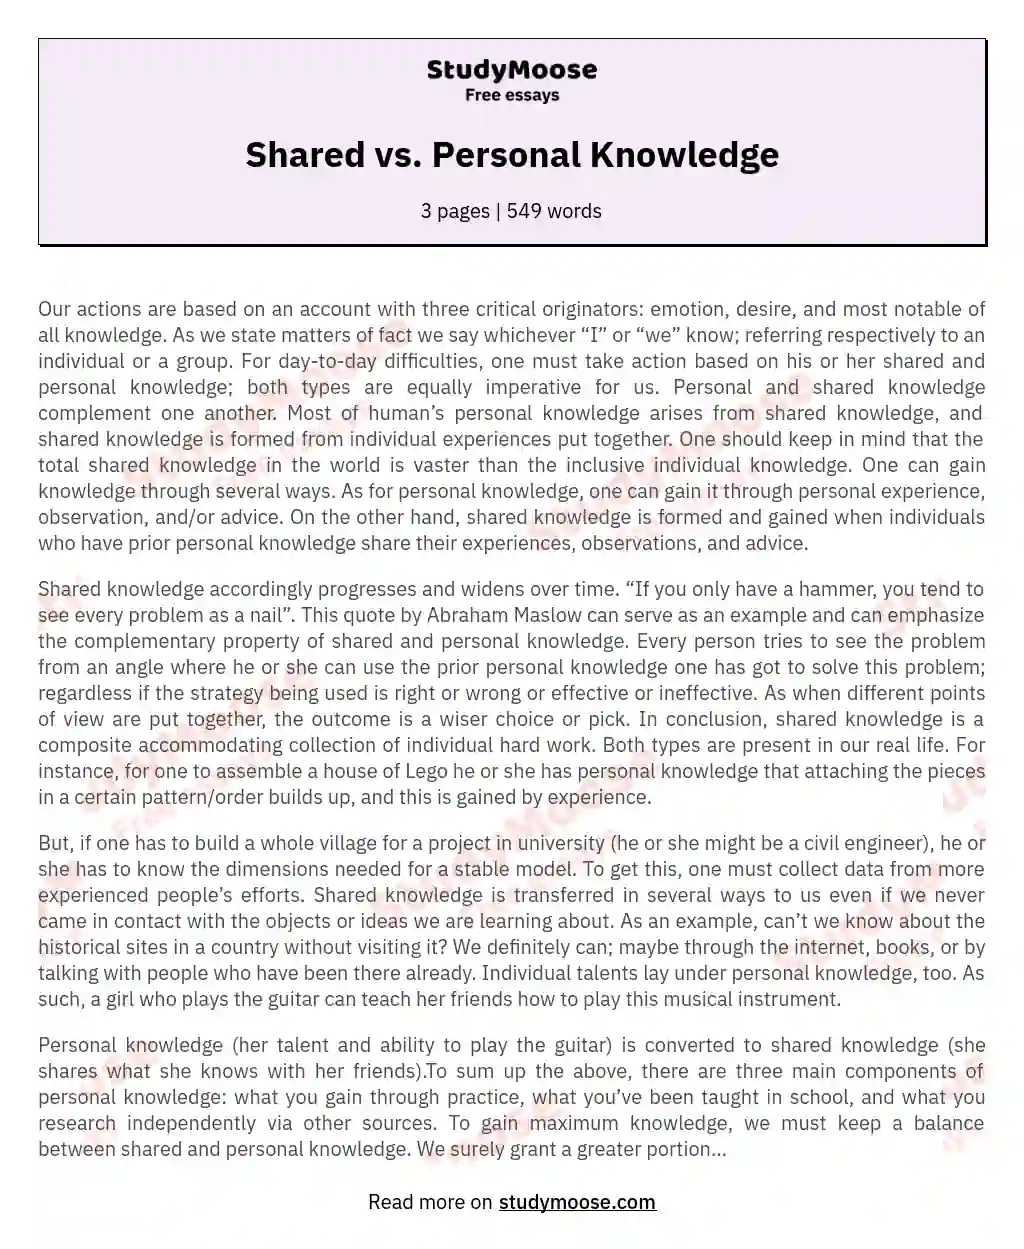 Shared vs. Personal Knowledge essay